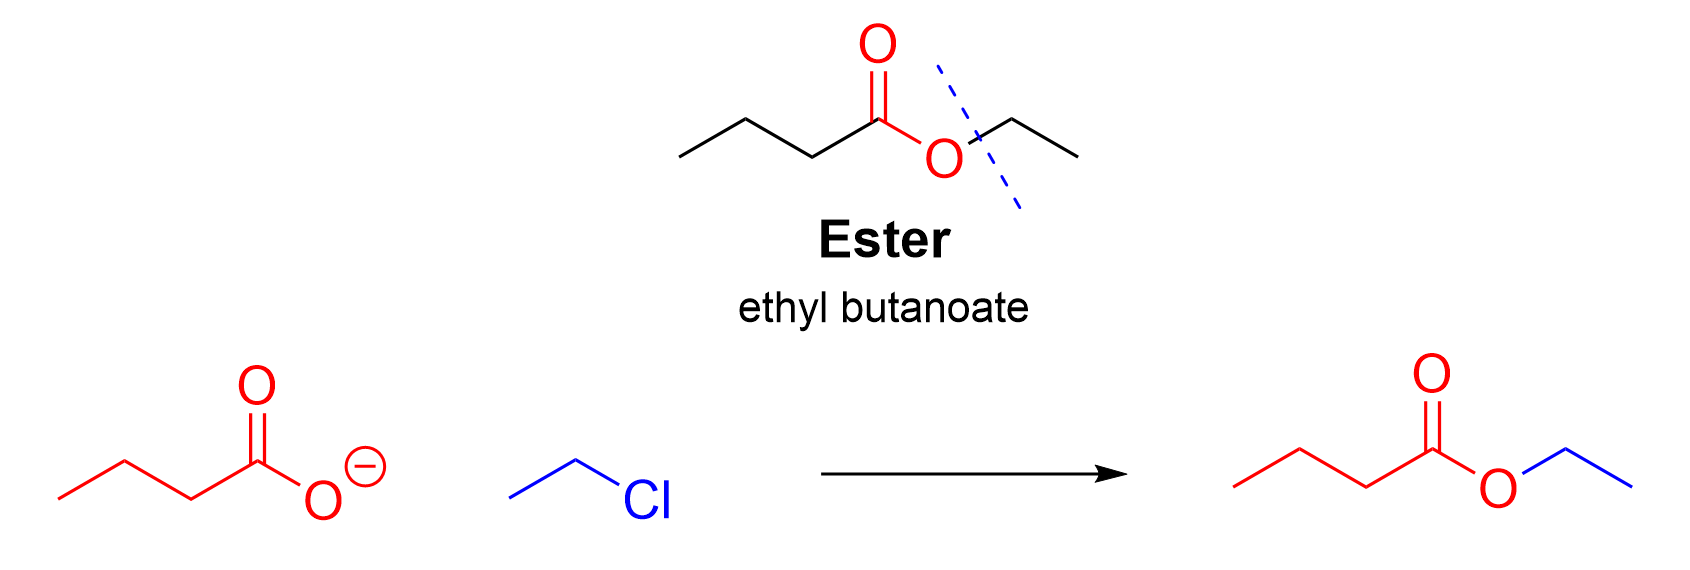 By cutting at the ester portion of ethyl butanoate, you can determine that a butyl carboxylate and ethyl halide (such as ethyl chloride) are needed to form the SN2 product ethyl butanoate.